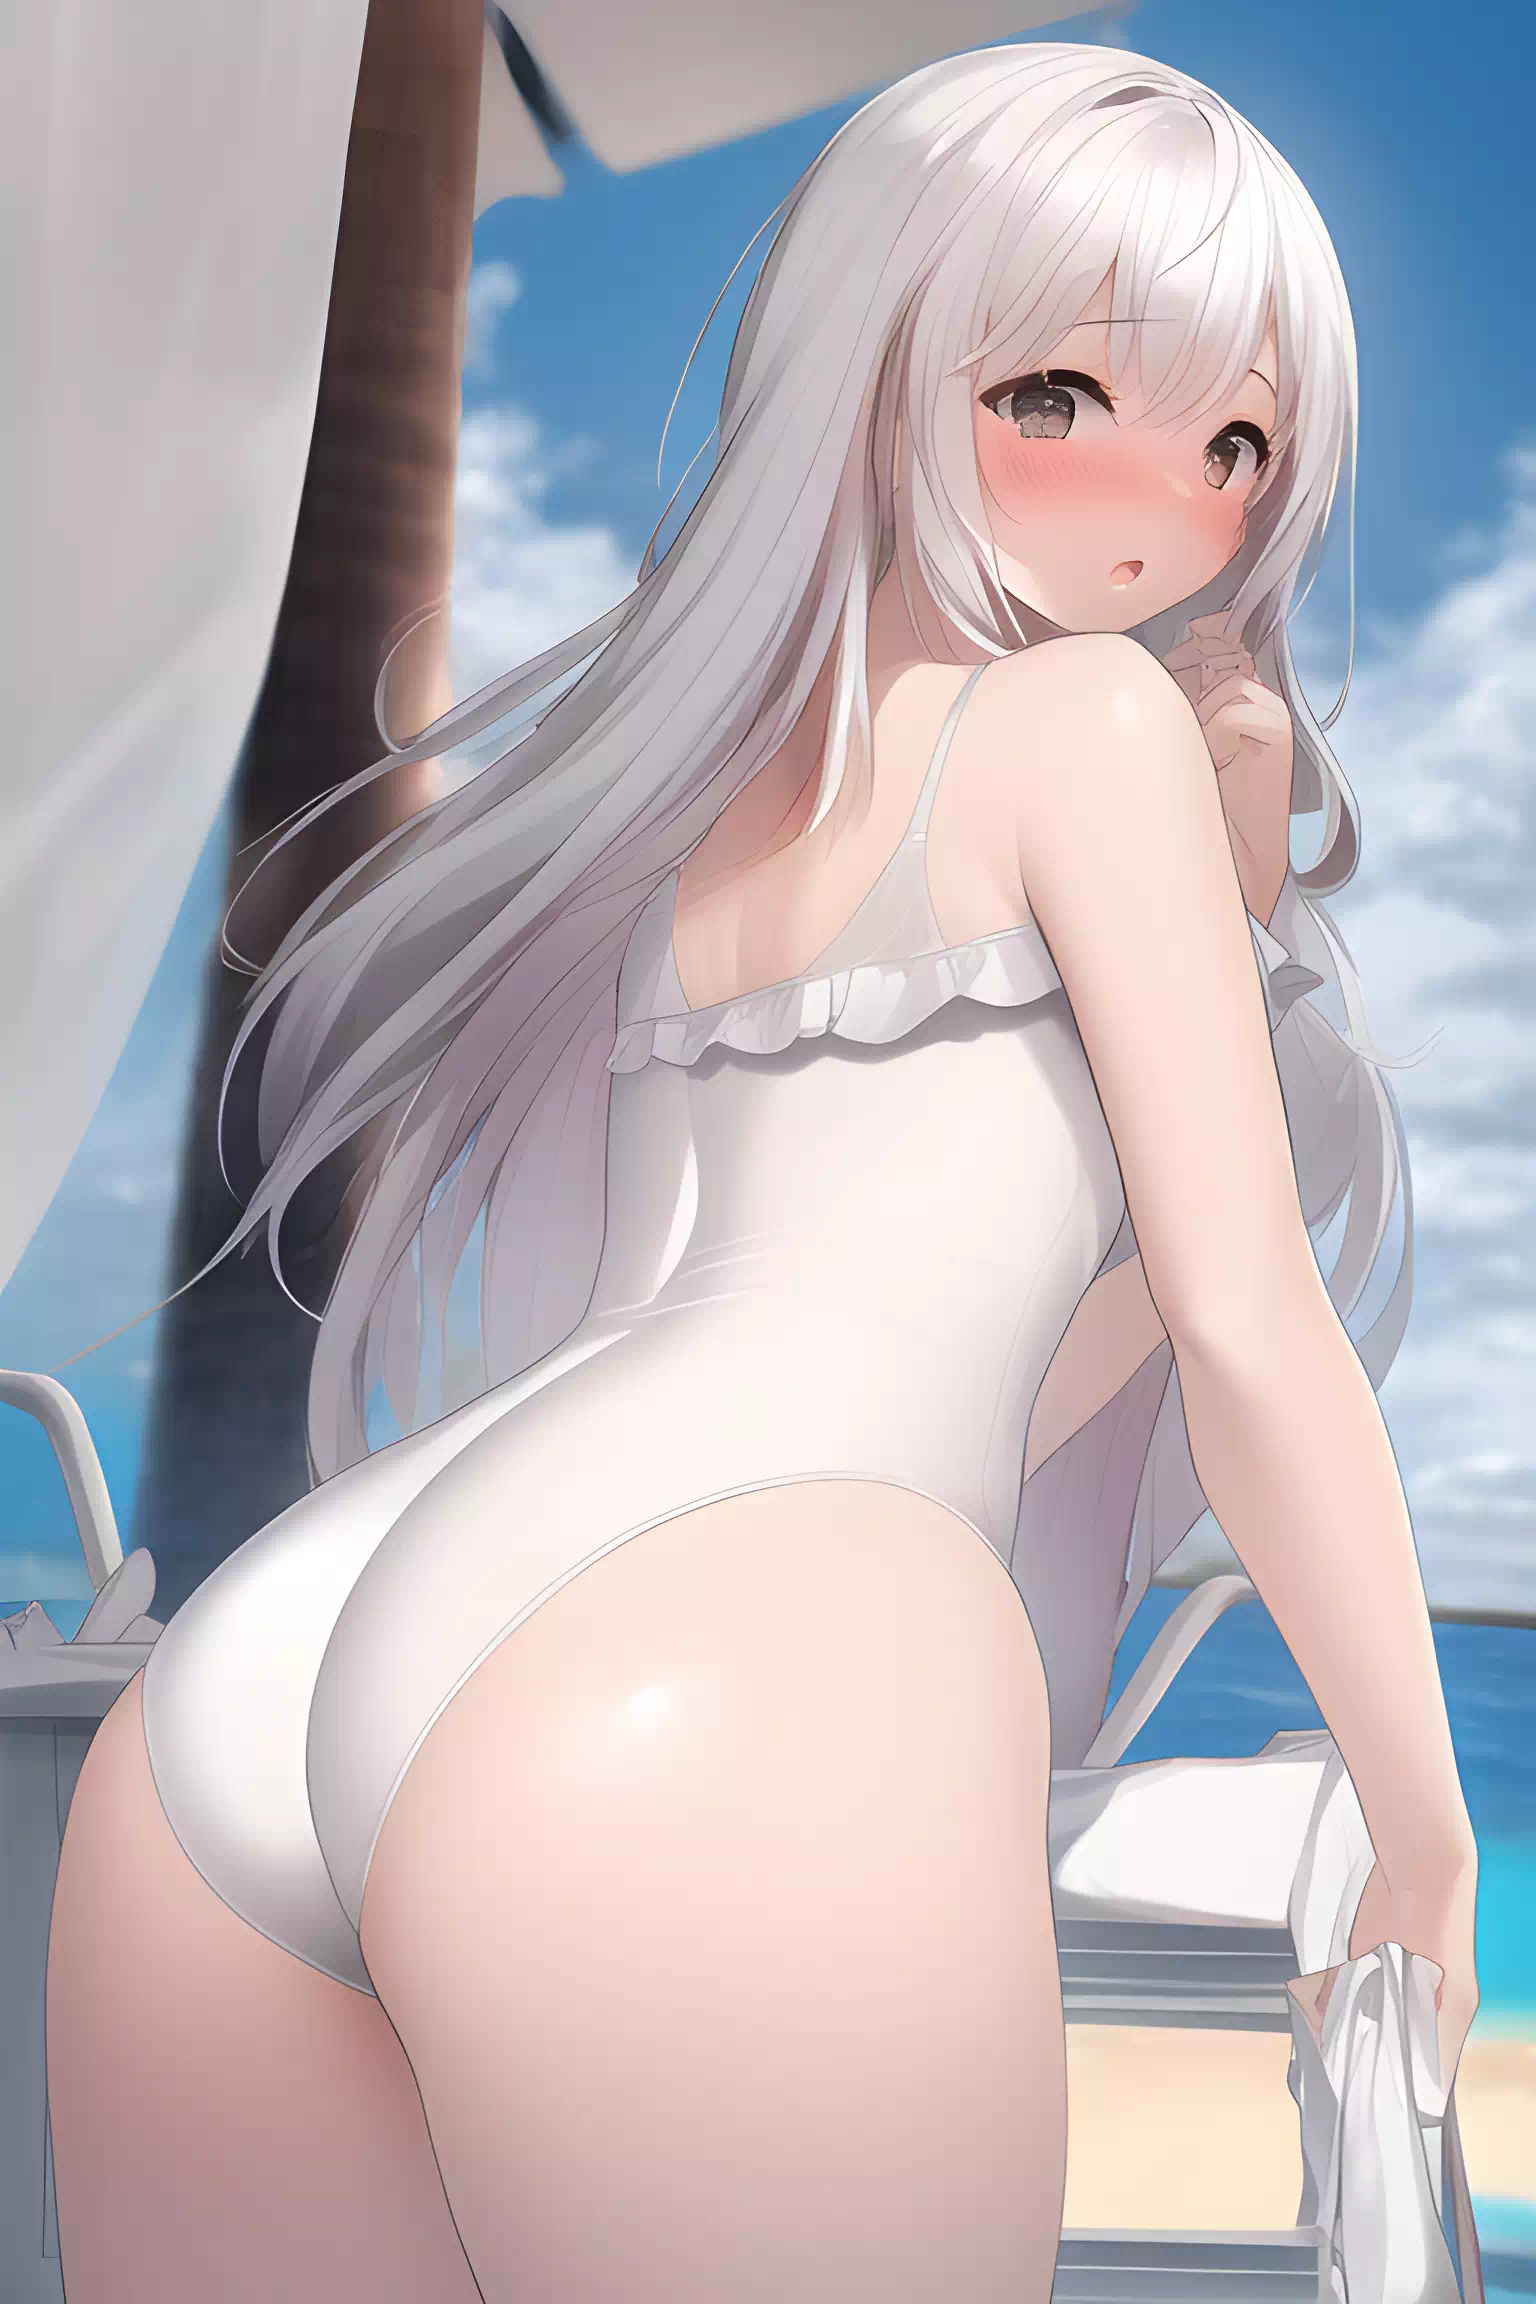 Caught at the Beach